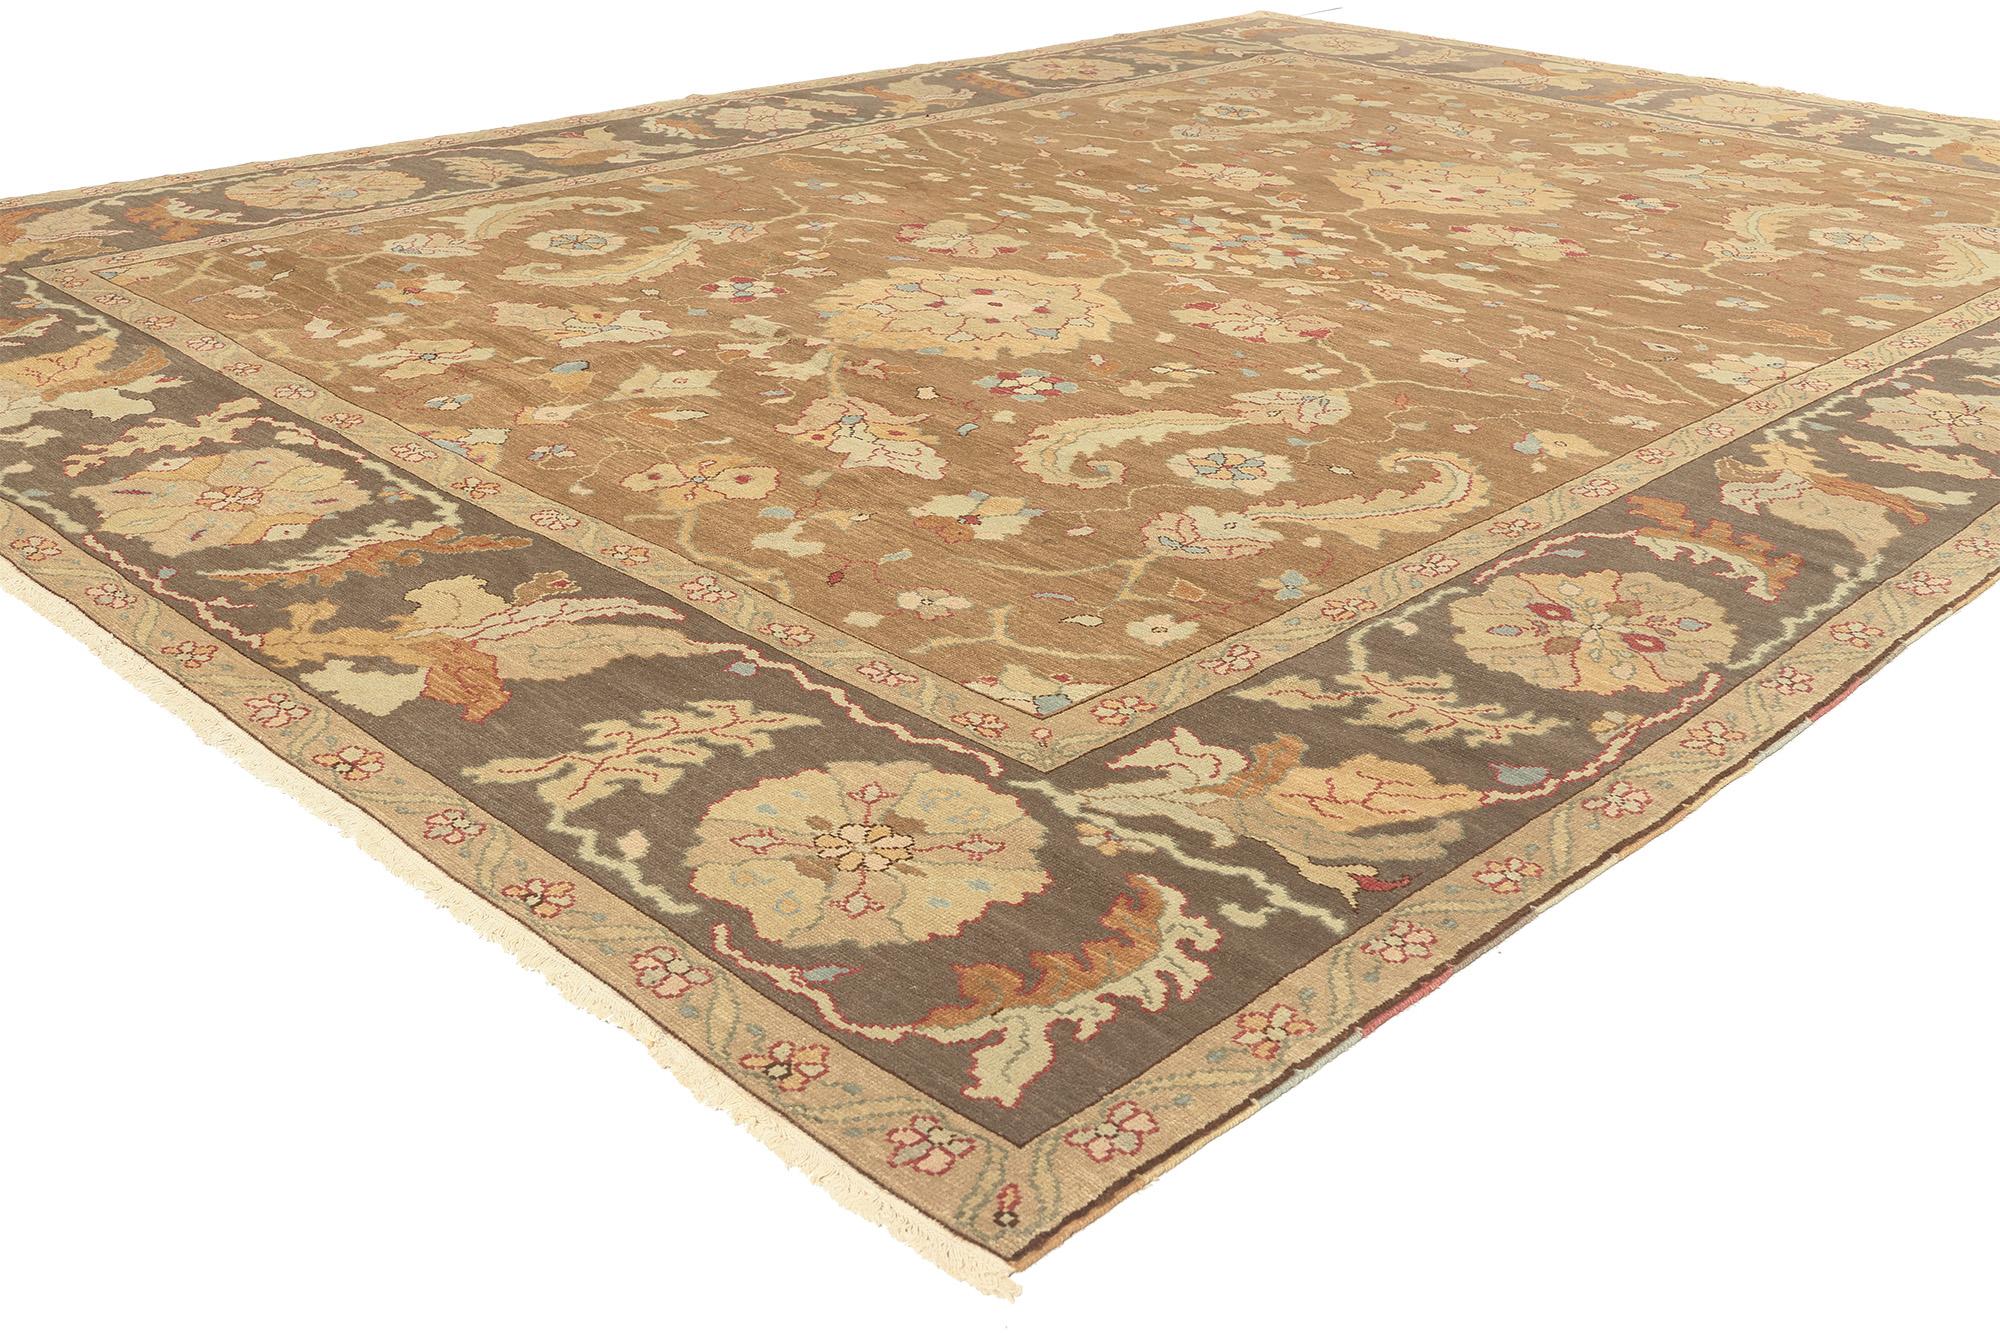 74372 Vintage Brown Turkish Oushak Rug, 08’09 x 11’09. In this hand-knotted wool vintage Turkish Oushak rug, the marriage of Biophilic Design and earth-tone elegance creates a captivating work of art. The botanical motifs and warm earthy hues